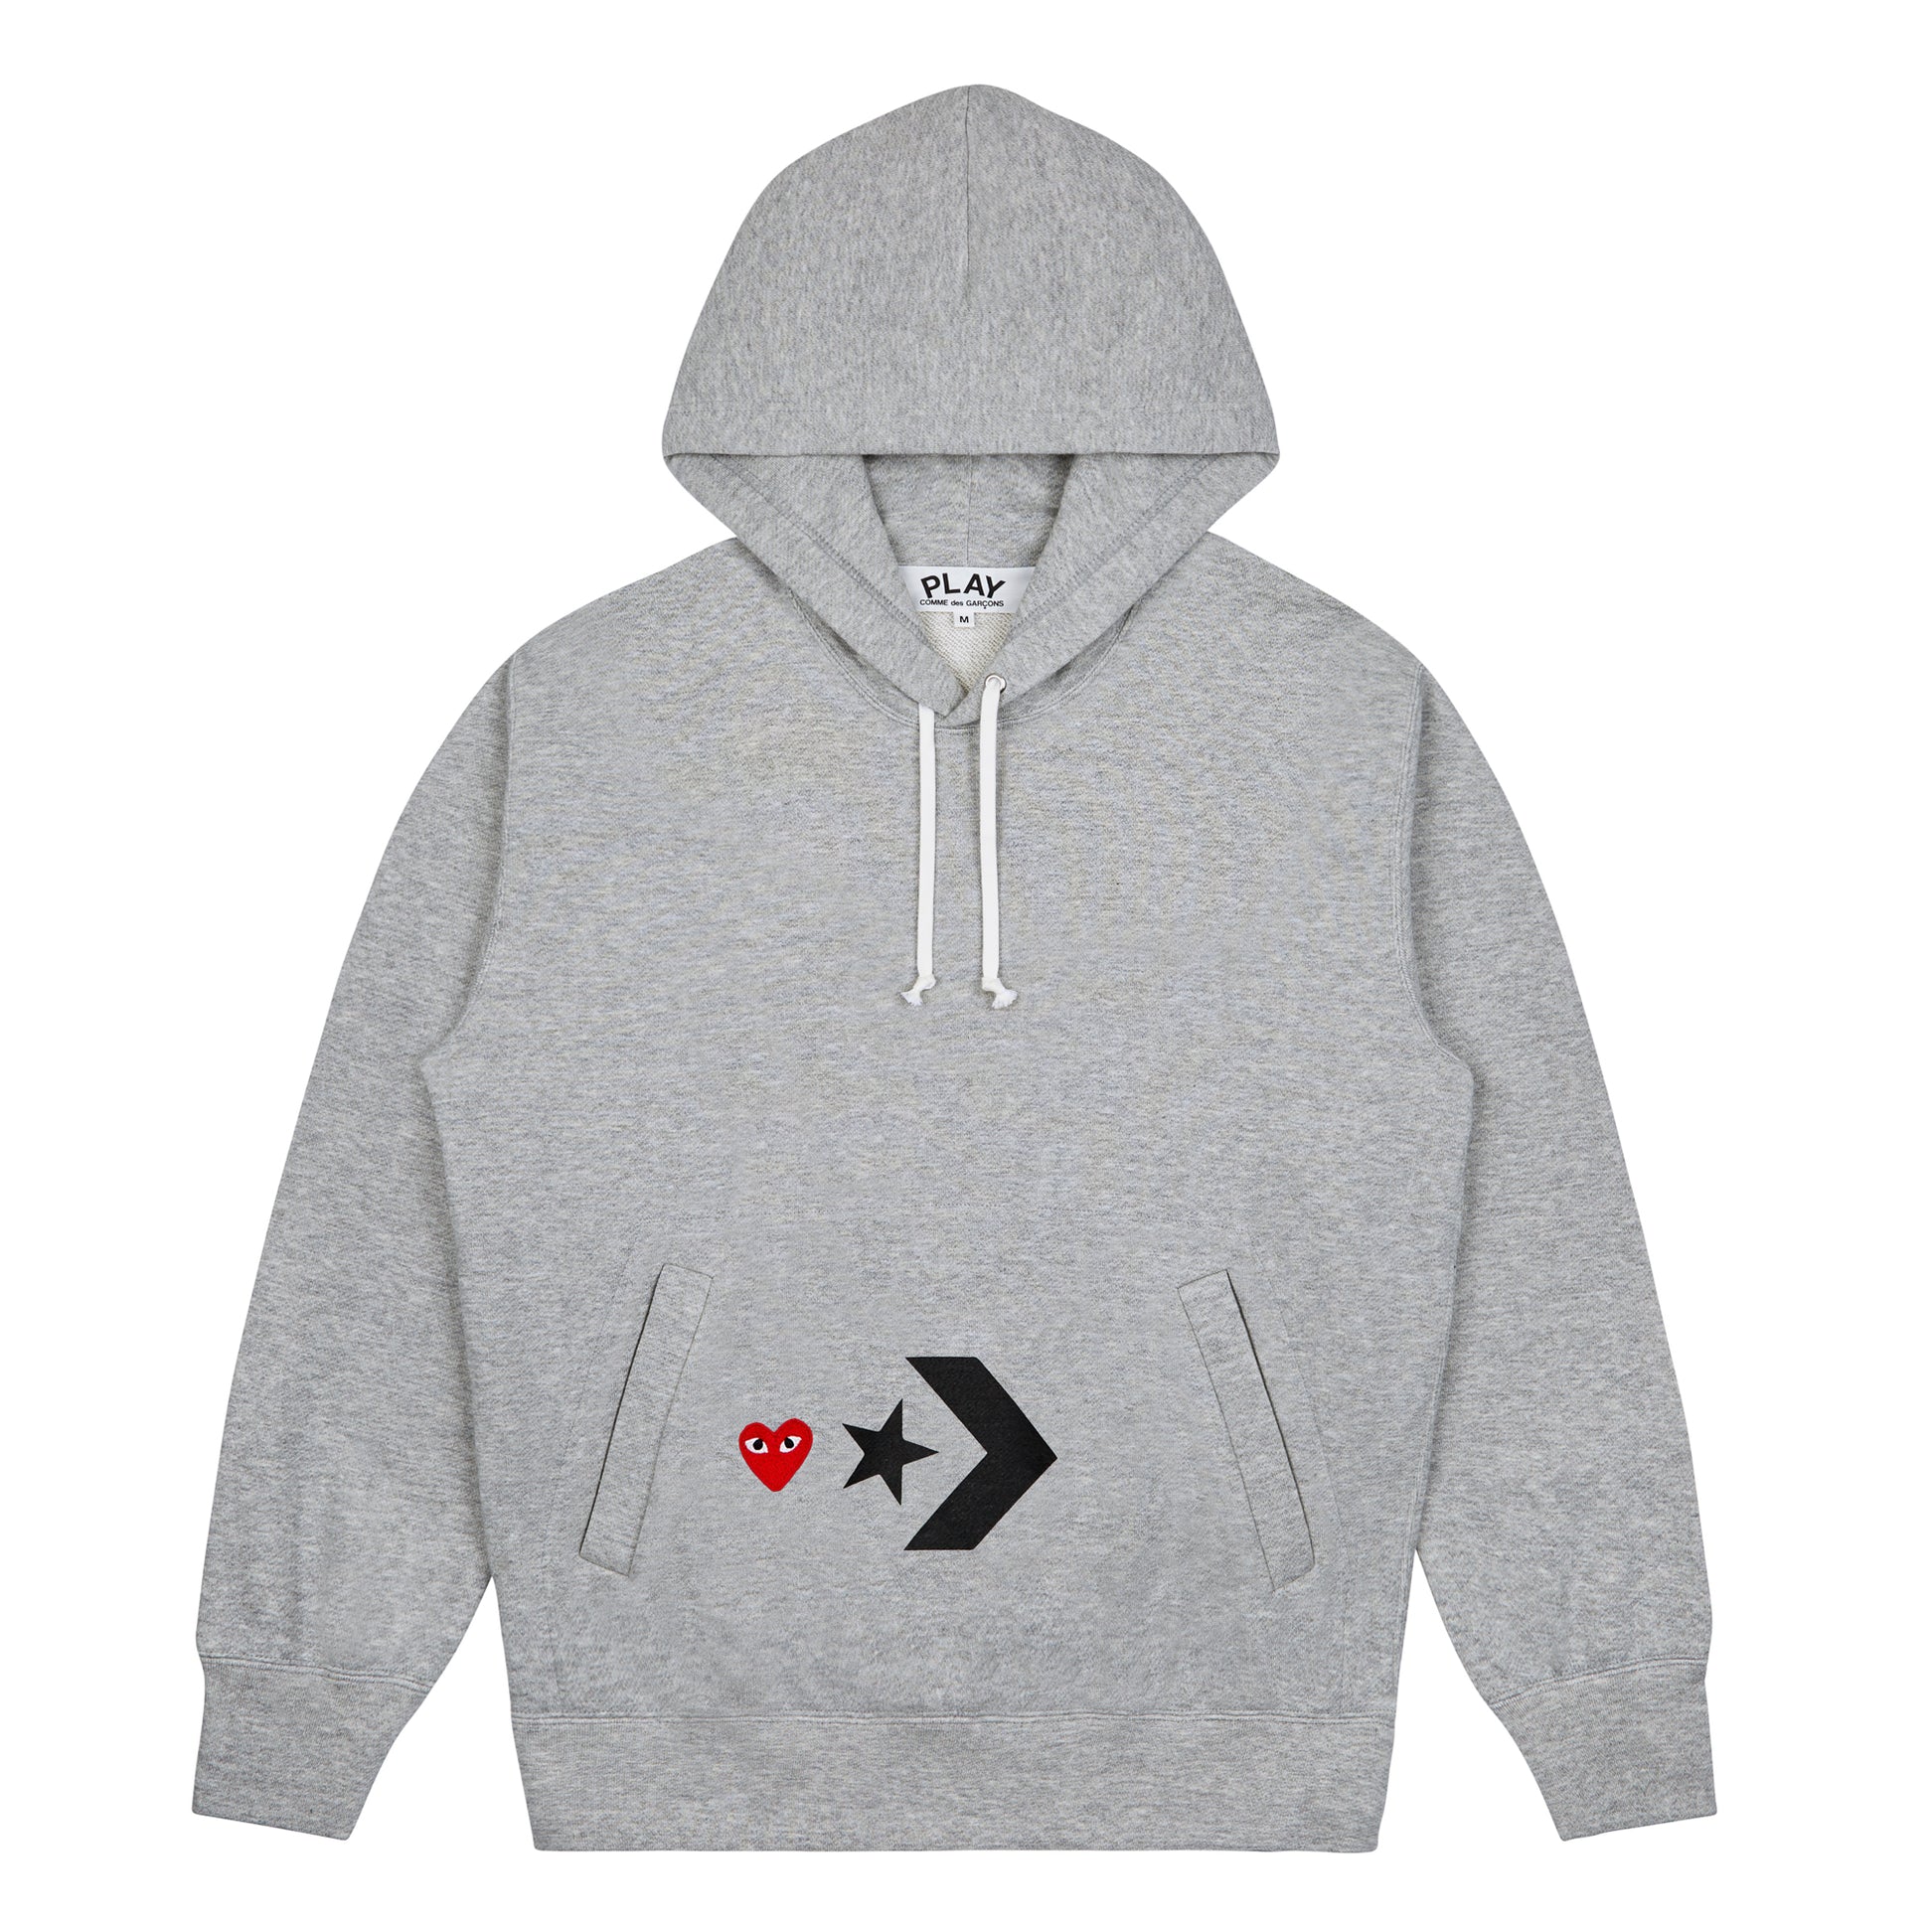 PLAY TOGETHER X CONVERSE HOODED SWEATSHIRT - CDG Official